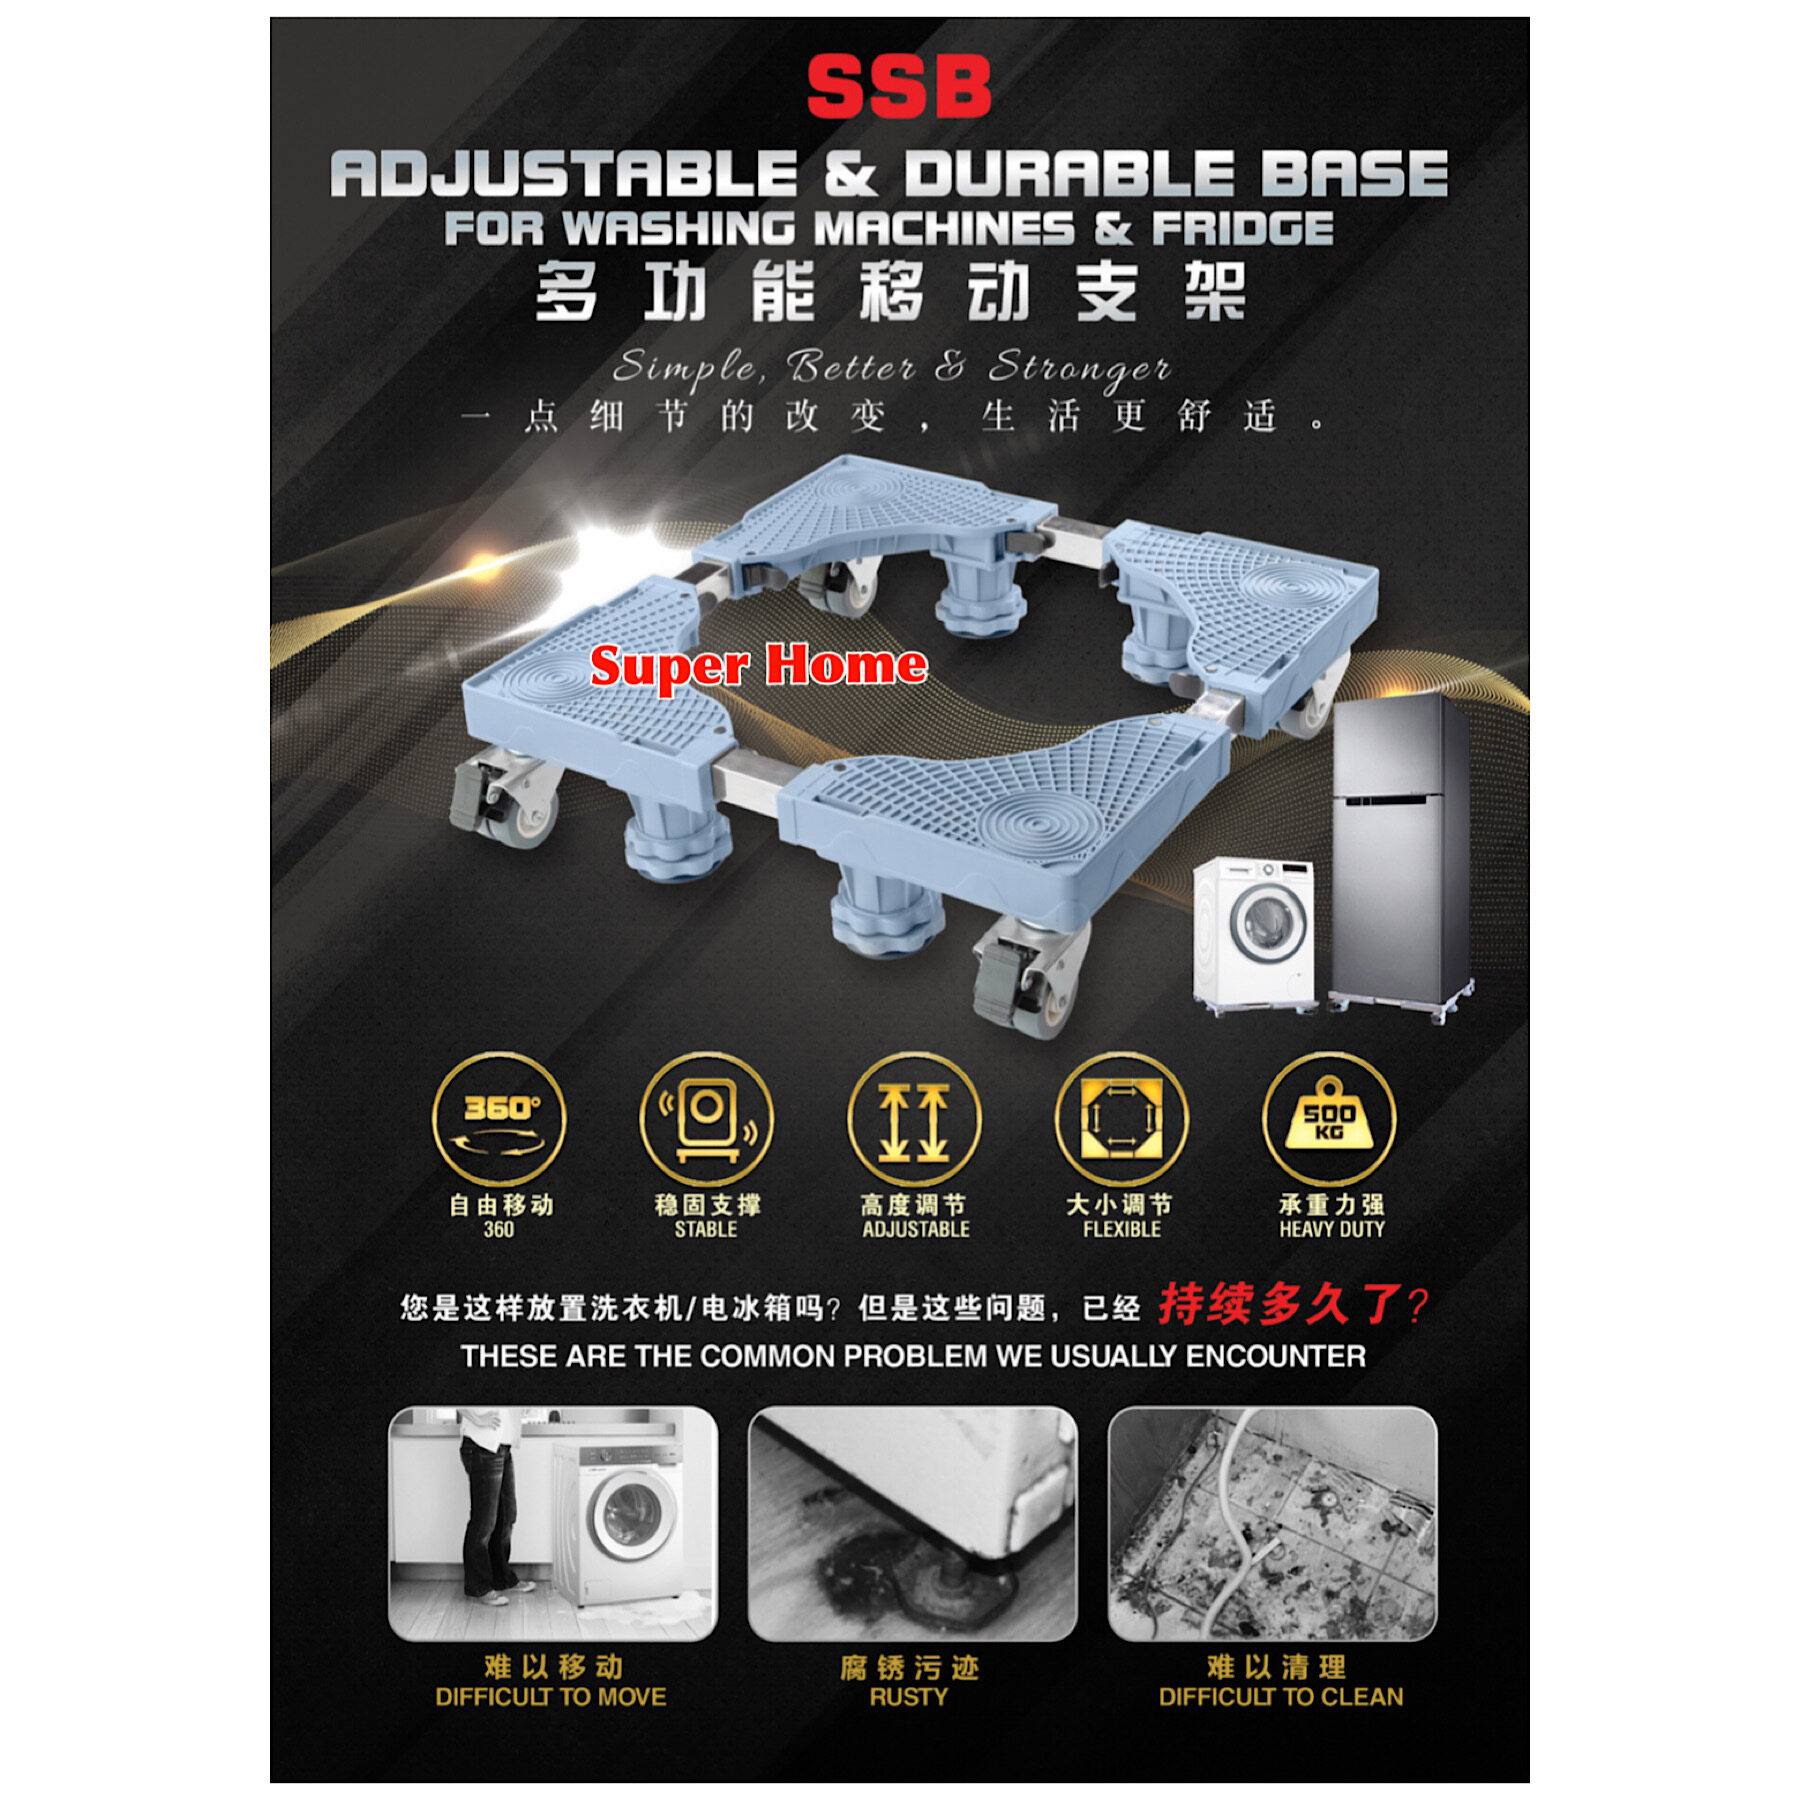 SSB Multi-Functional Flexibility Movable Heavy Duty Adjustable Base (Heavy Support up to 500 KG & High Quality Materials) For Washing Machine, Dryer and Refrigerator, Cabinet